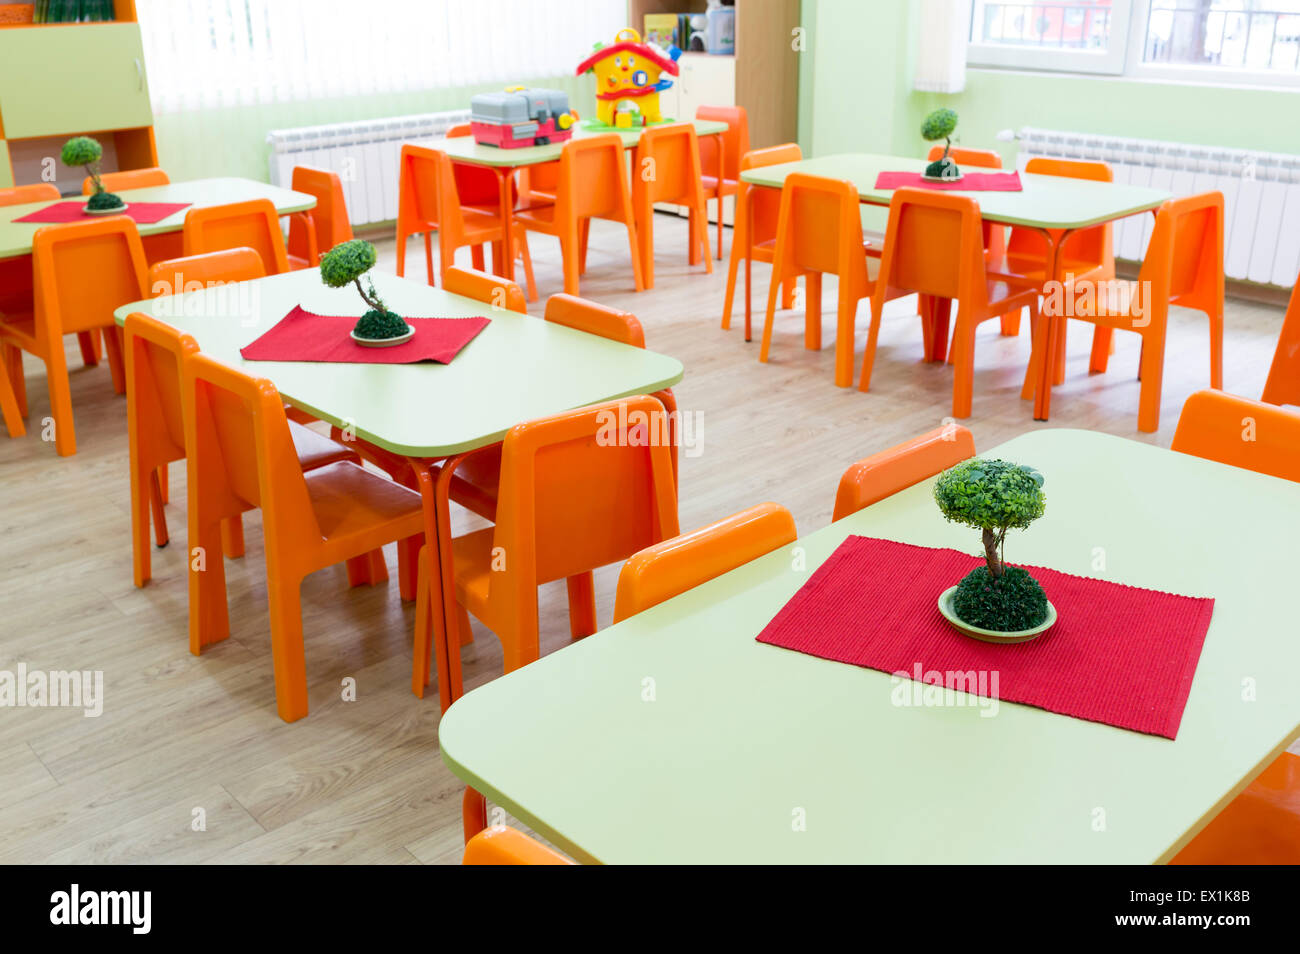 https://c8.alamy.com/comp/EX1K8B/kindergarten-classroom-with-small-chairs-and-tables-for-the-kids-EX1K8B.jpg